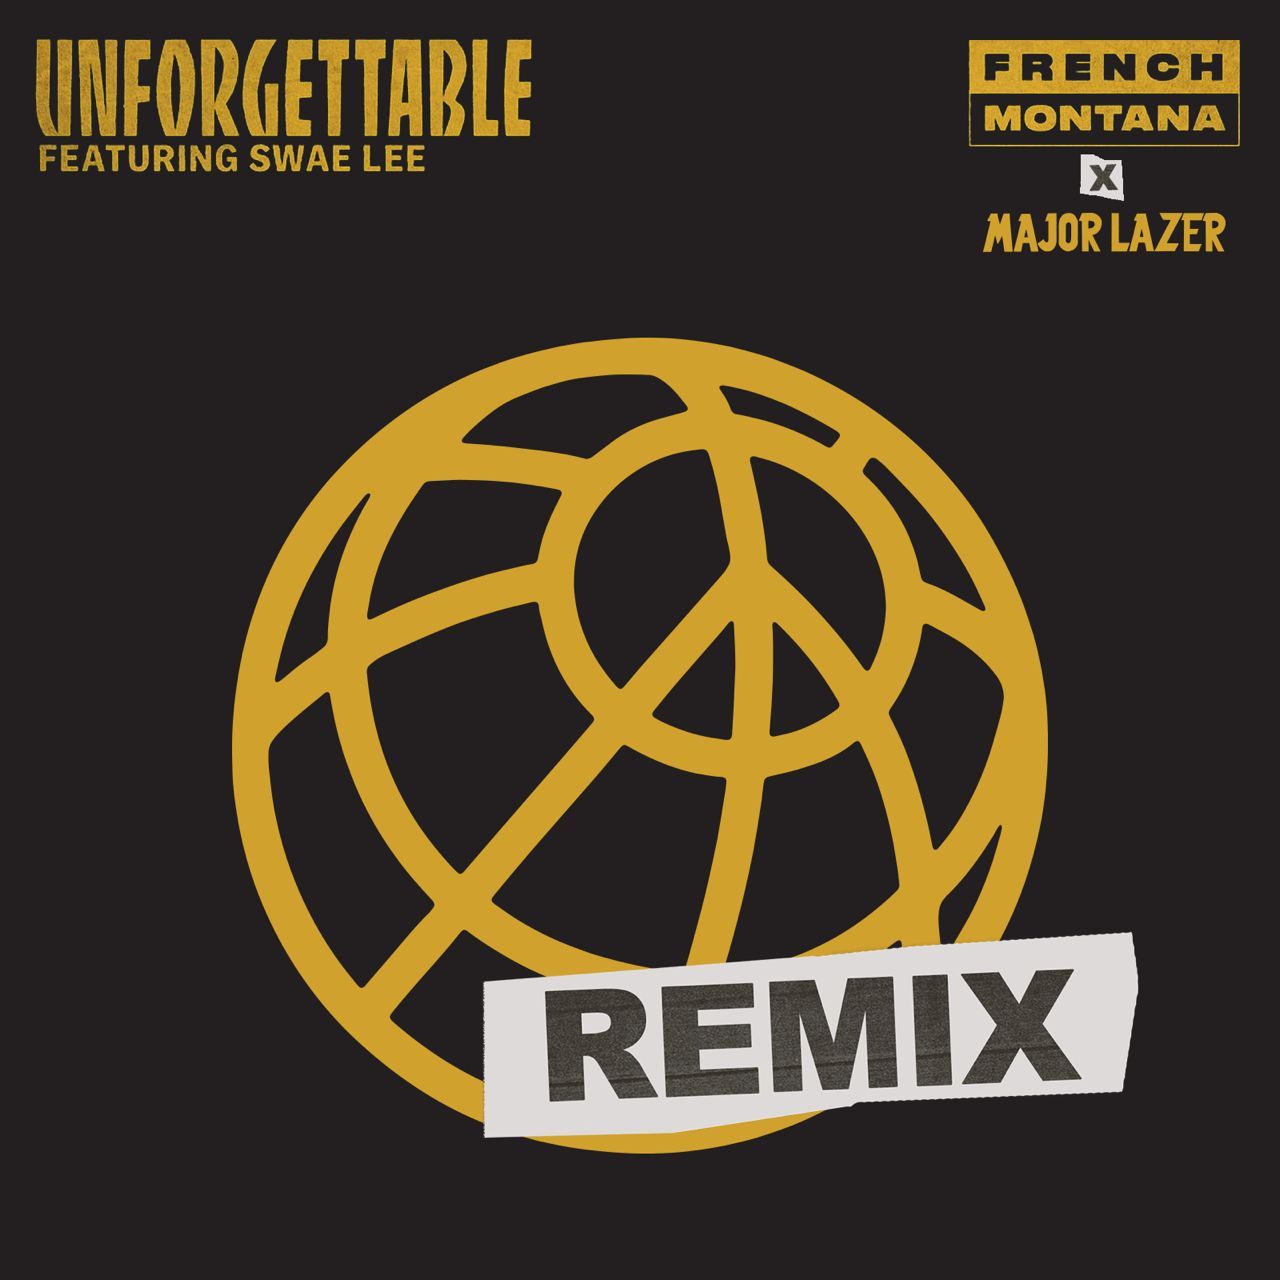 French remix. French Montana feat. Swae Lee - Unforgettable. Major Lazer. French Montana Swae Lee. Unforgettable (feat. Swae Lee).